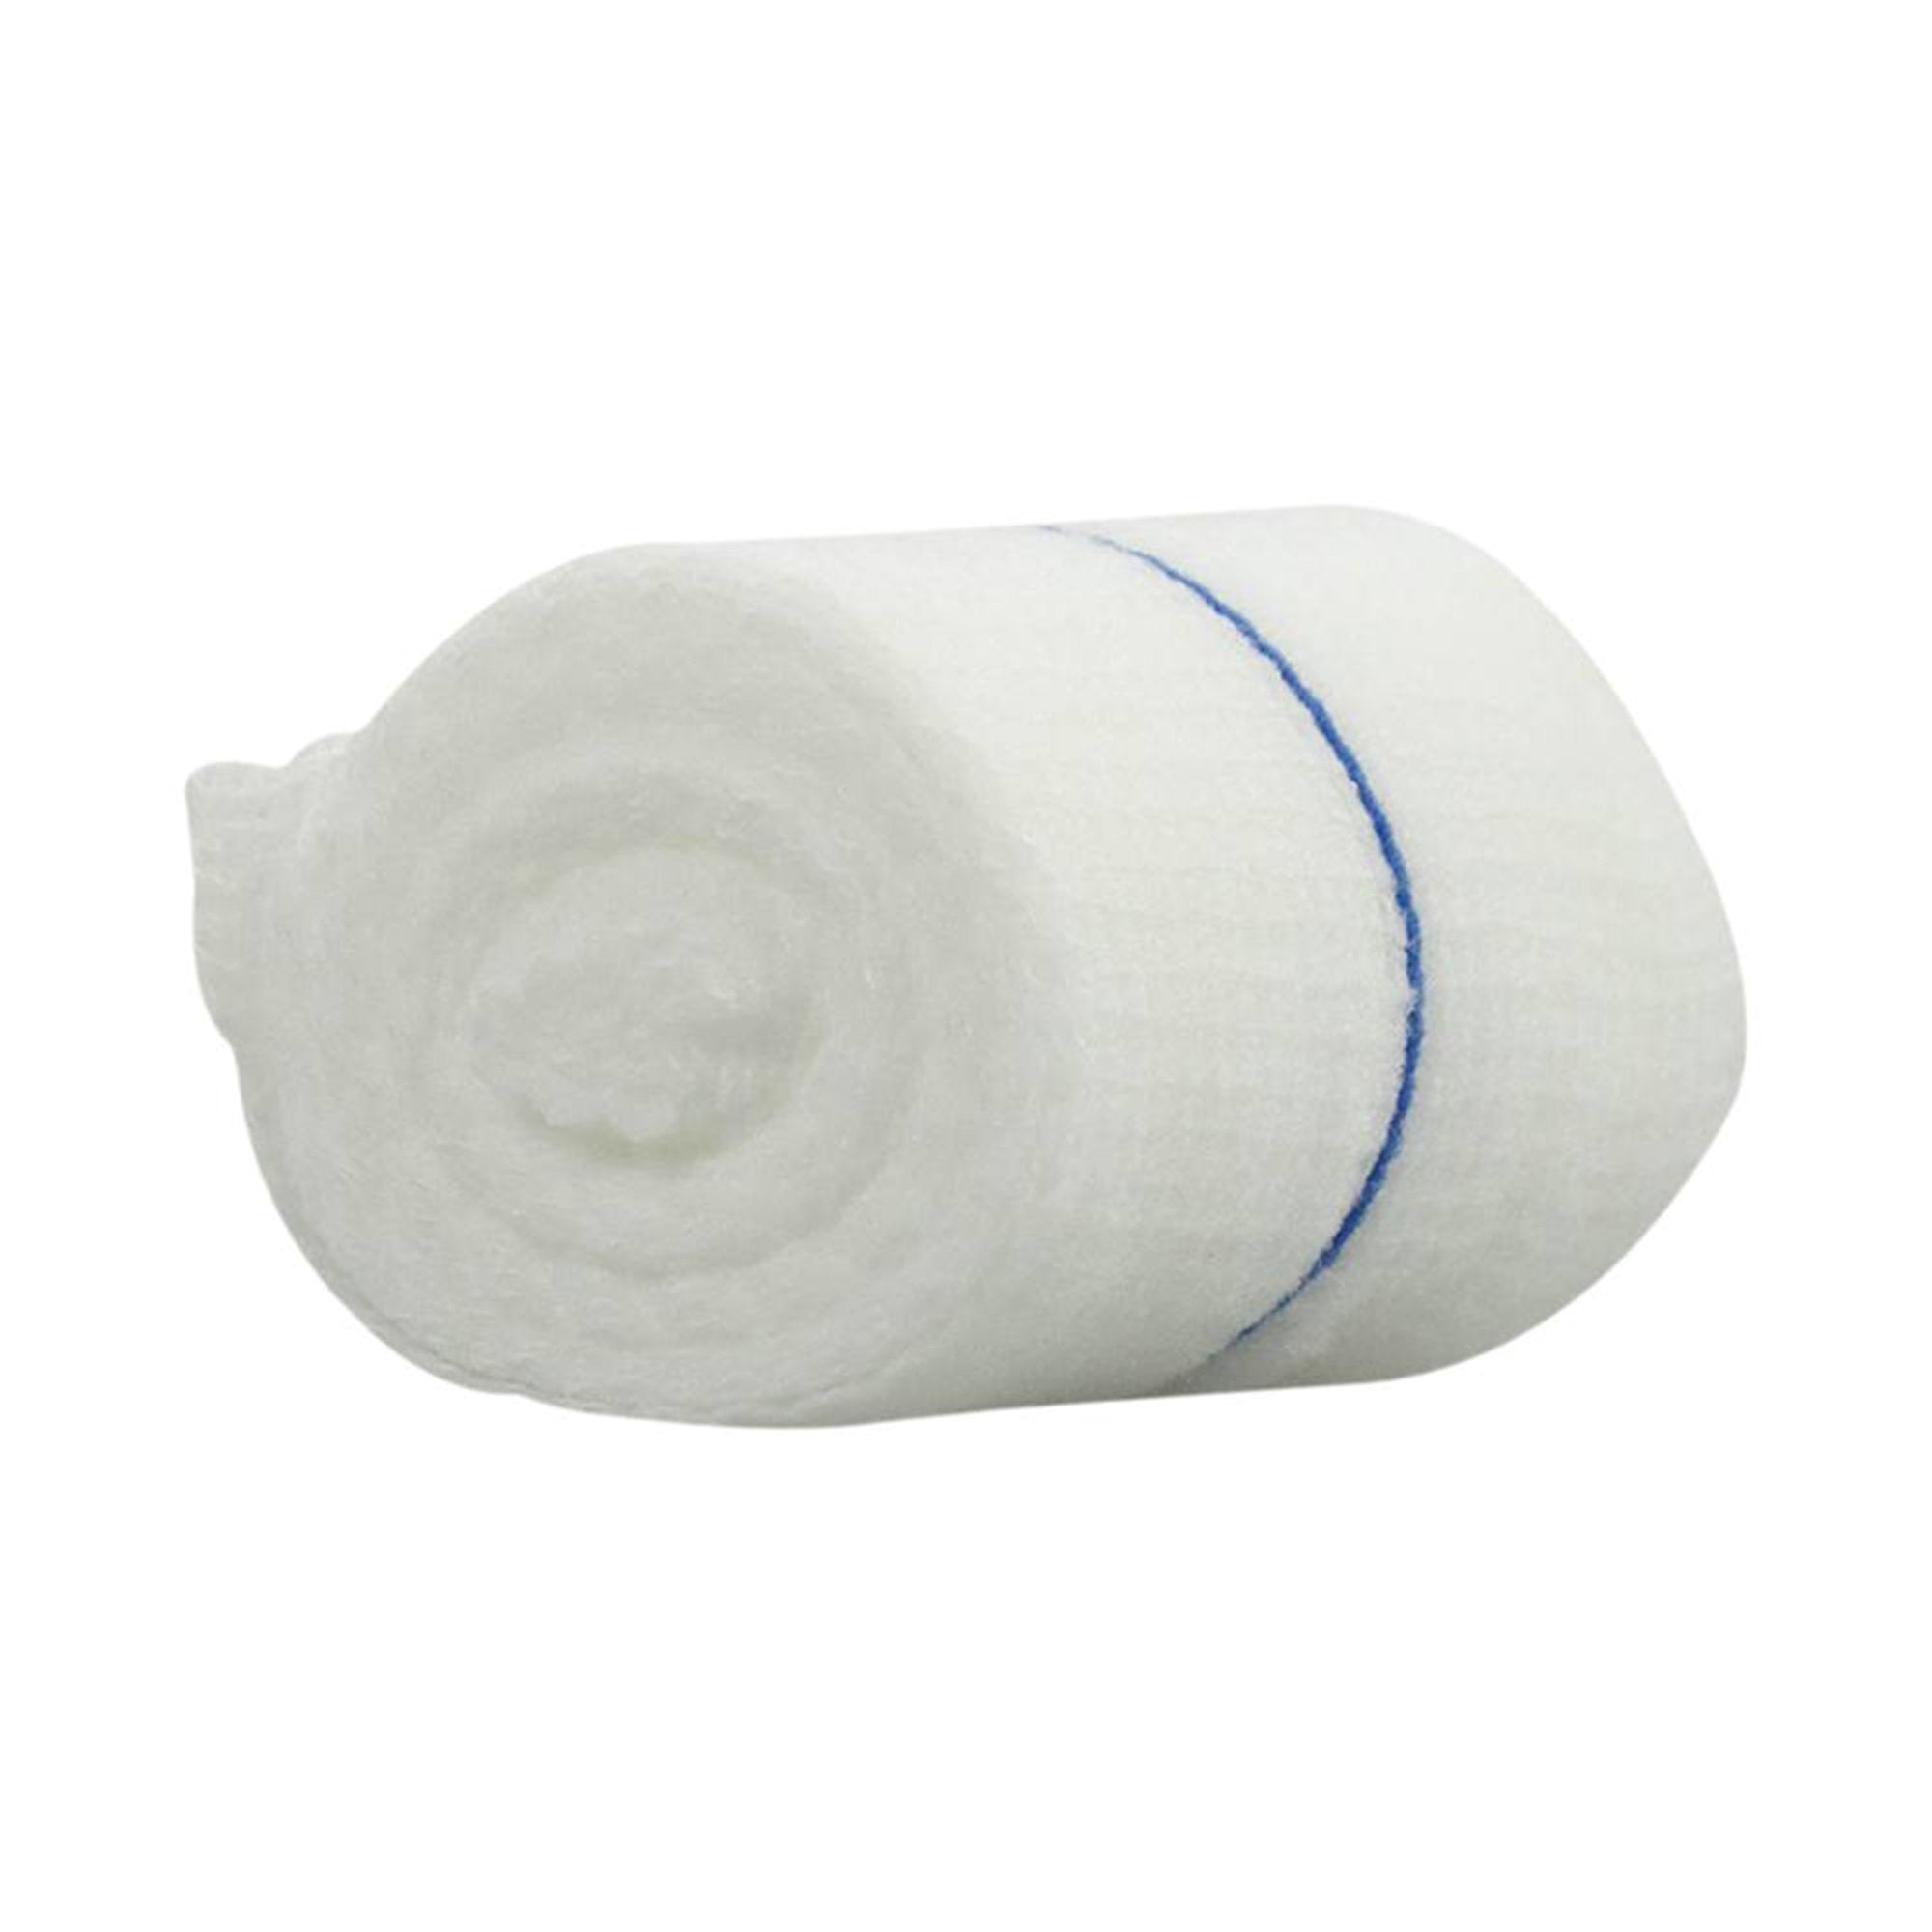 Conforming Bandage Flexicon® 2 Inch X 4-1/10 Yard 1 per Pack Sterile 1-Ply Roll Shape